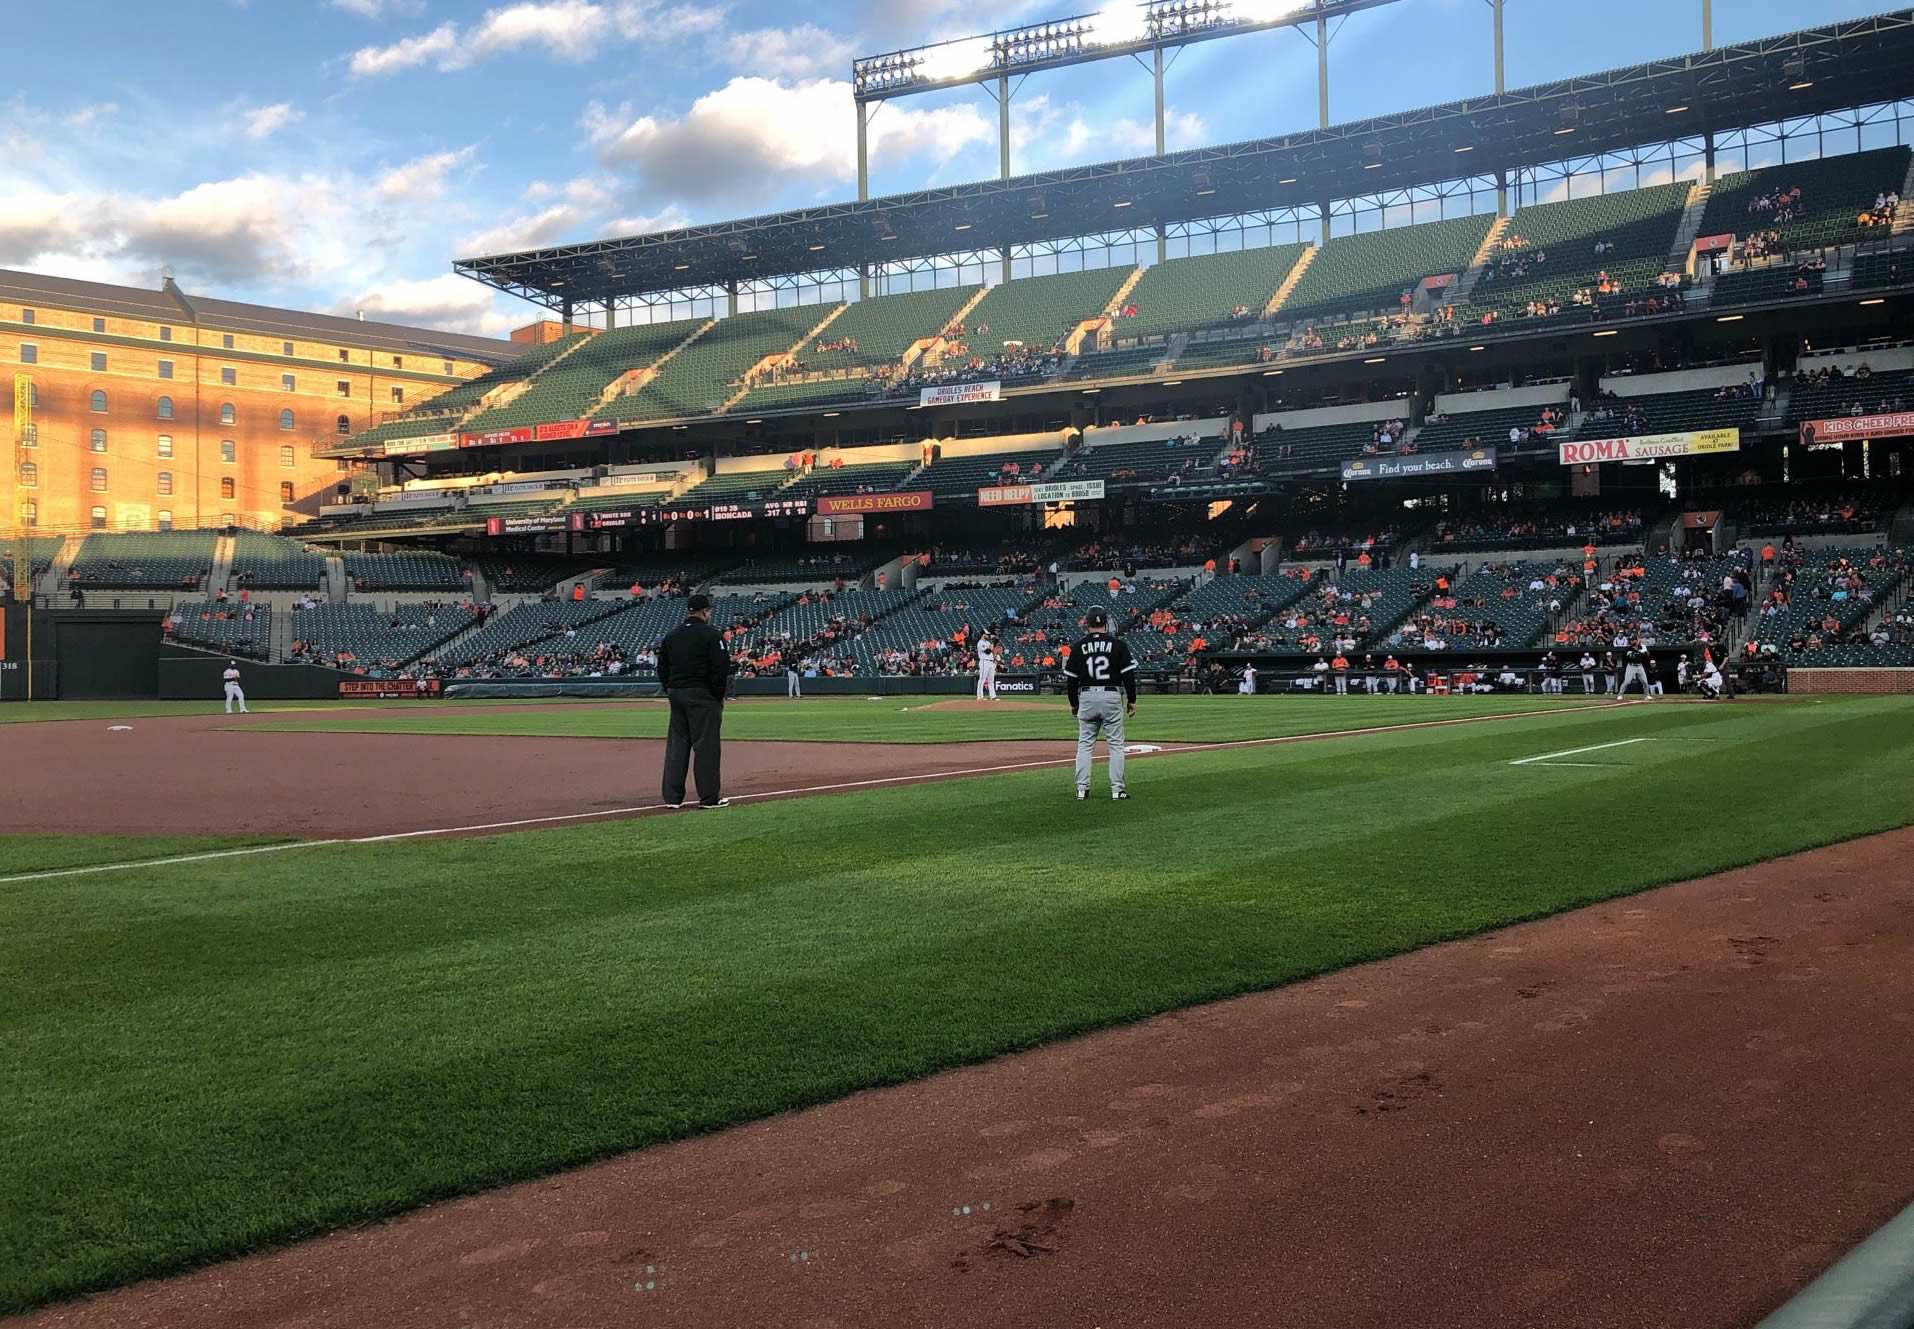 section 60, row 1 seat view  - oriole park